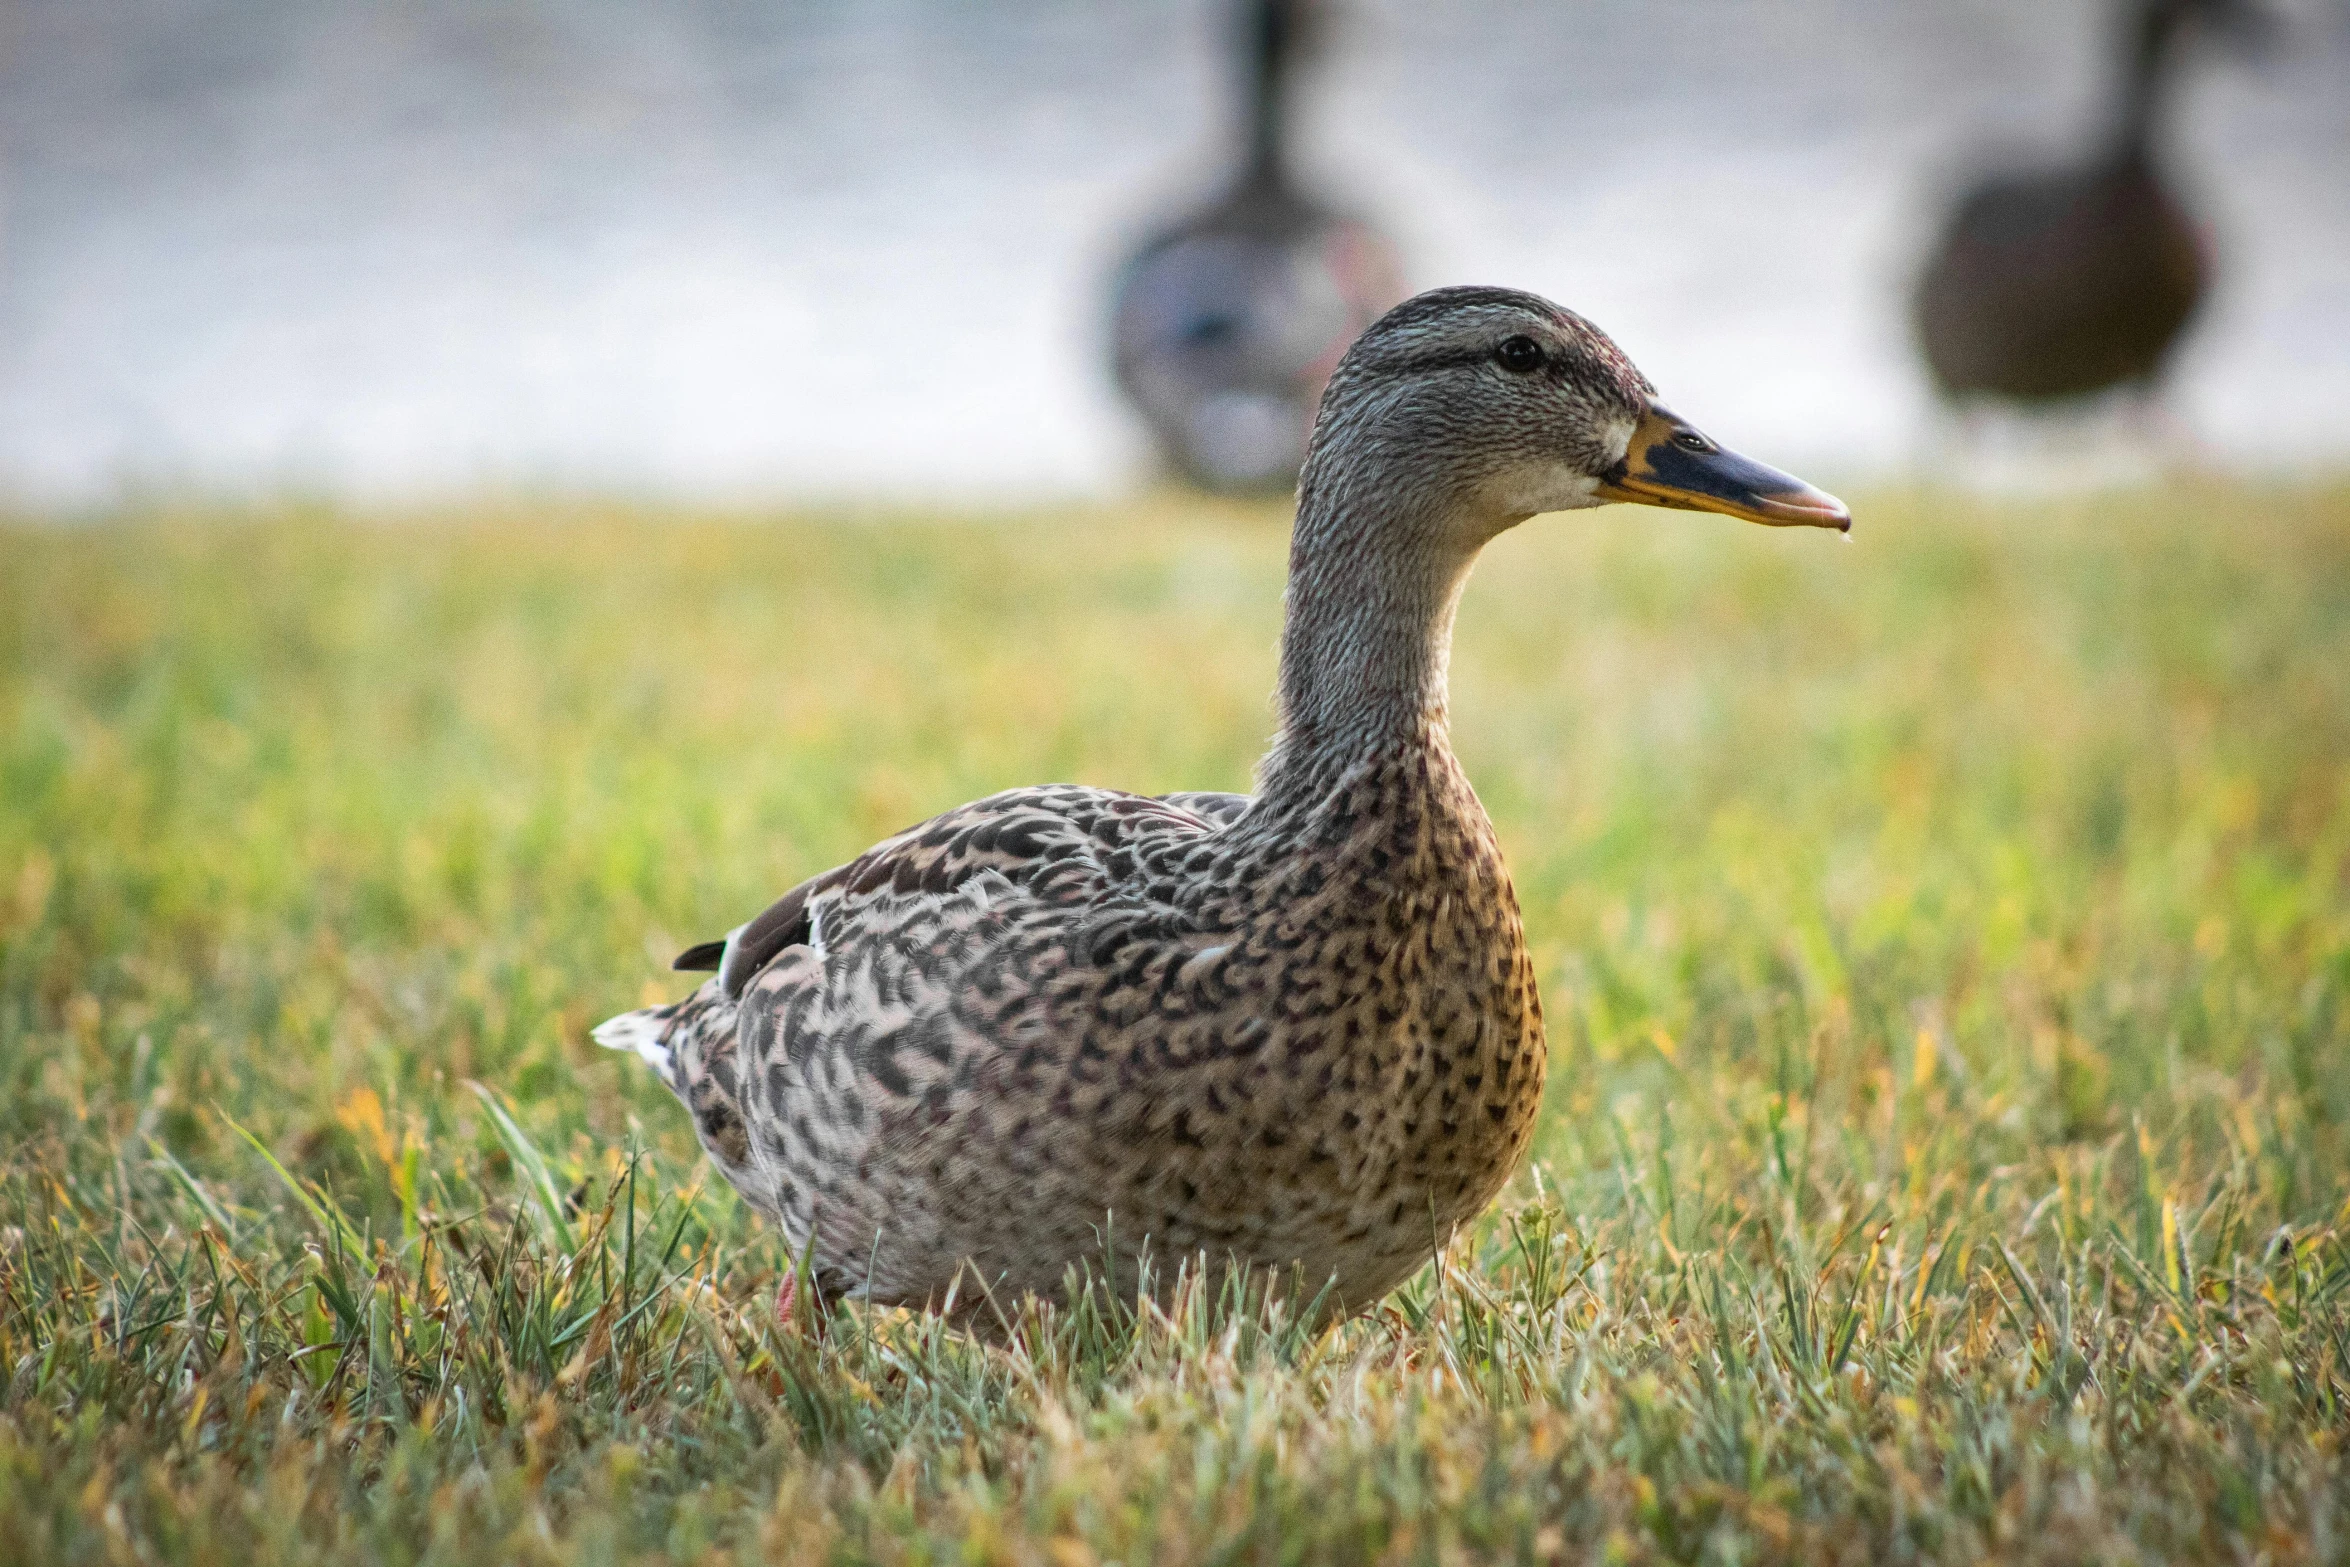 a duck standing in the grass with another duck next to it